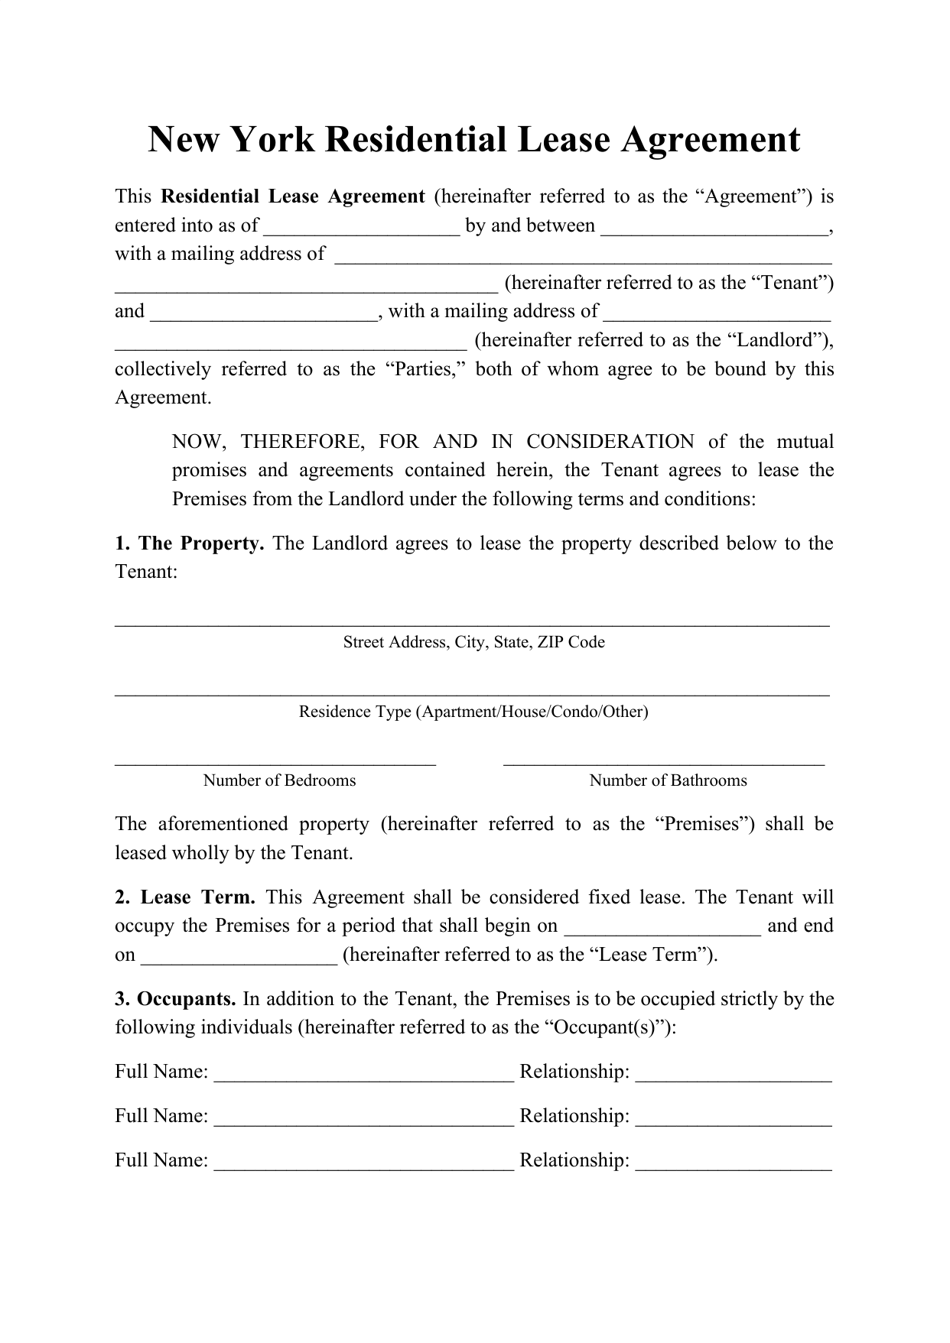 free-new-york-standard-residential-lease-agreement-template-pdf